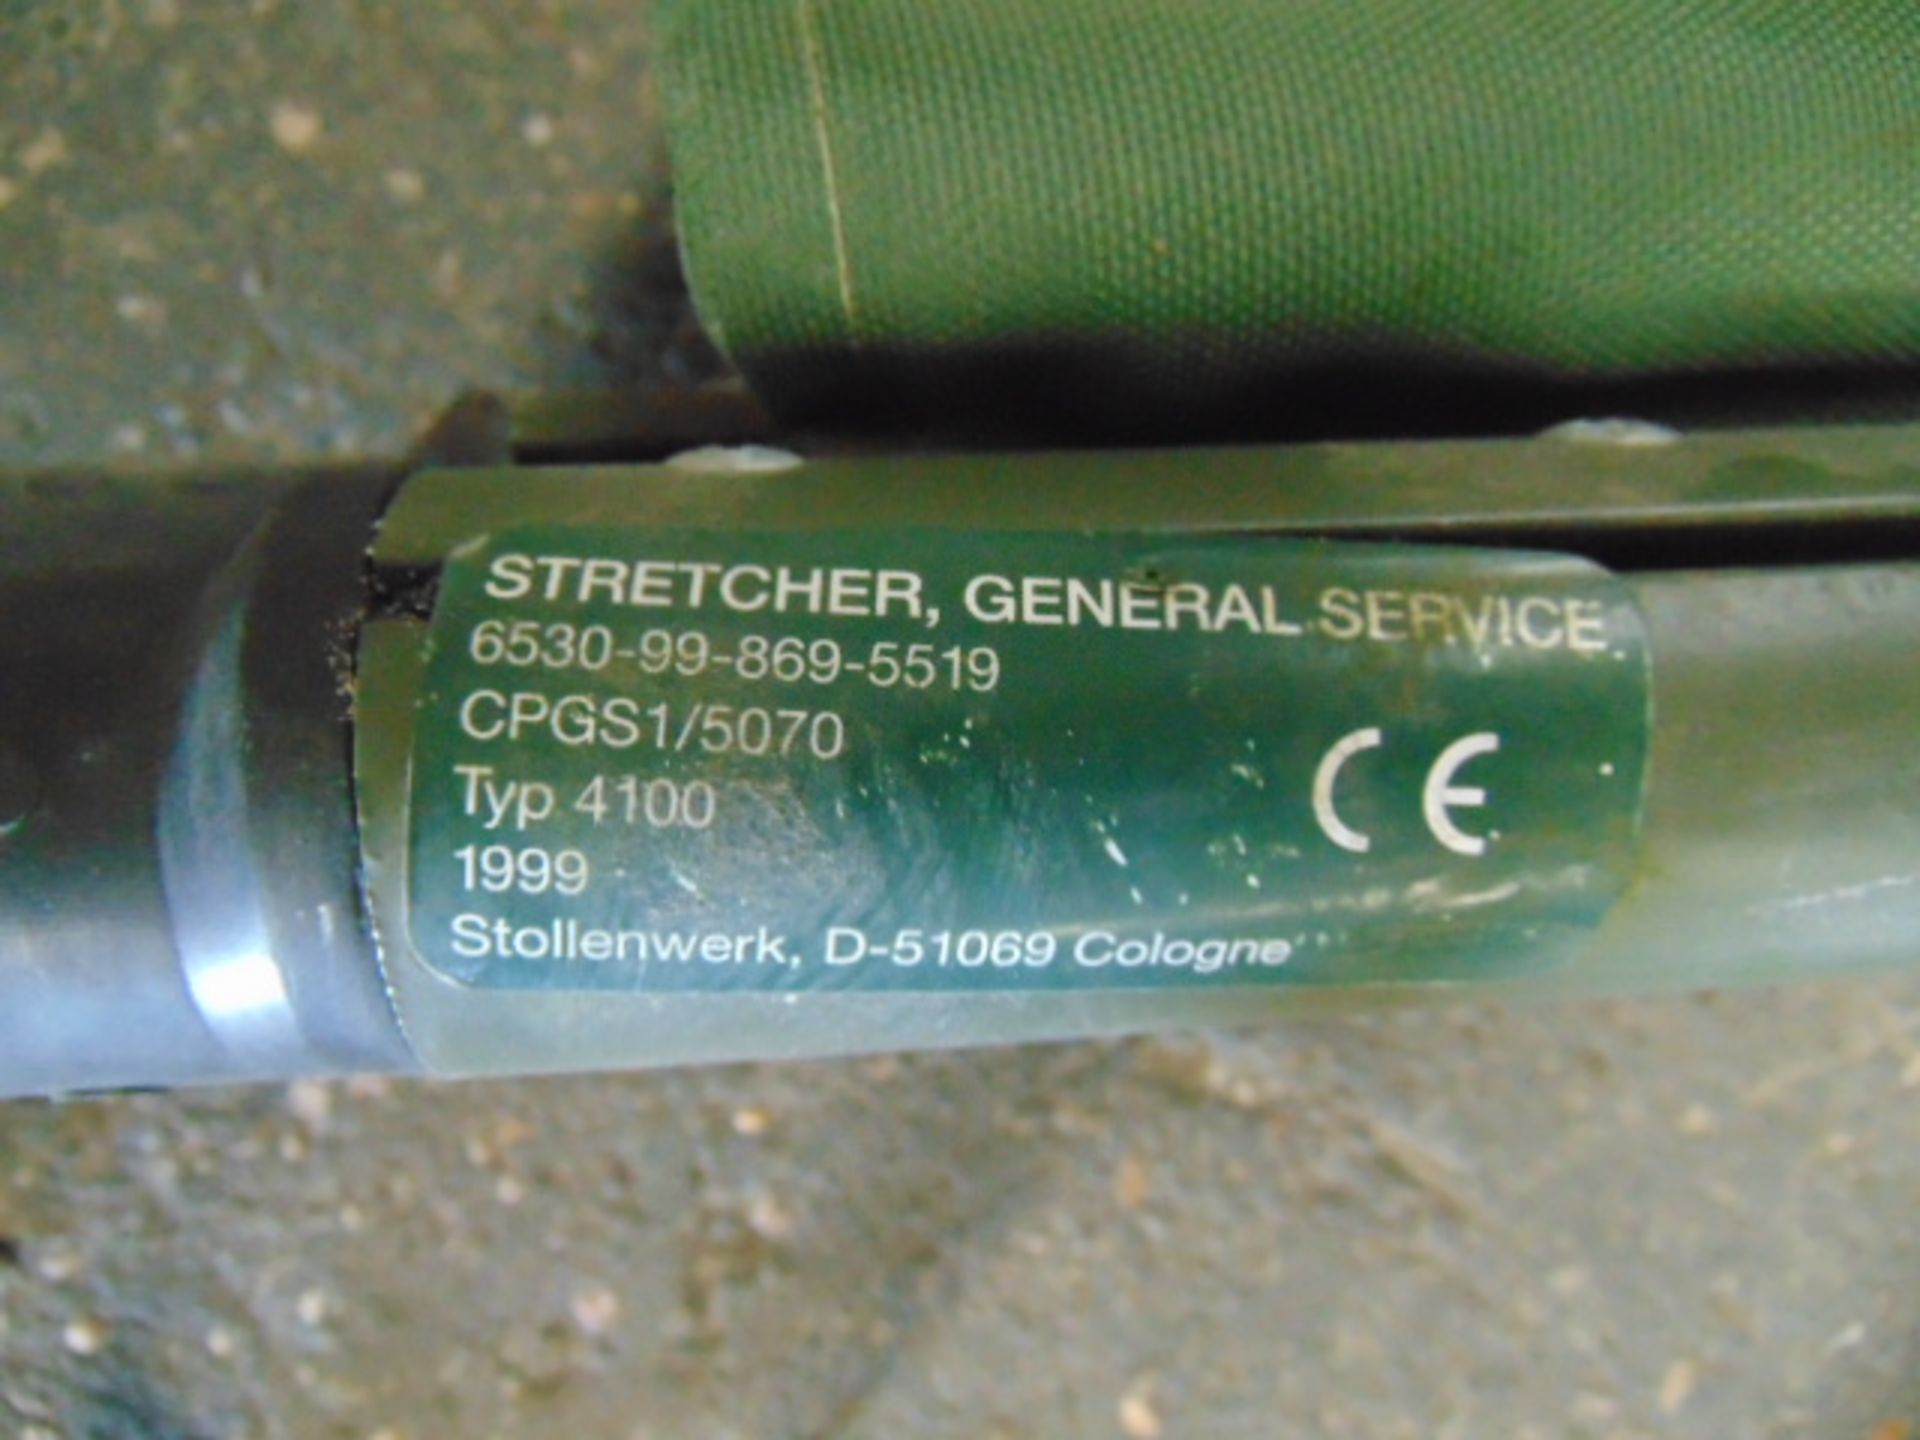 General Service Stretcher - Image 4 of 6